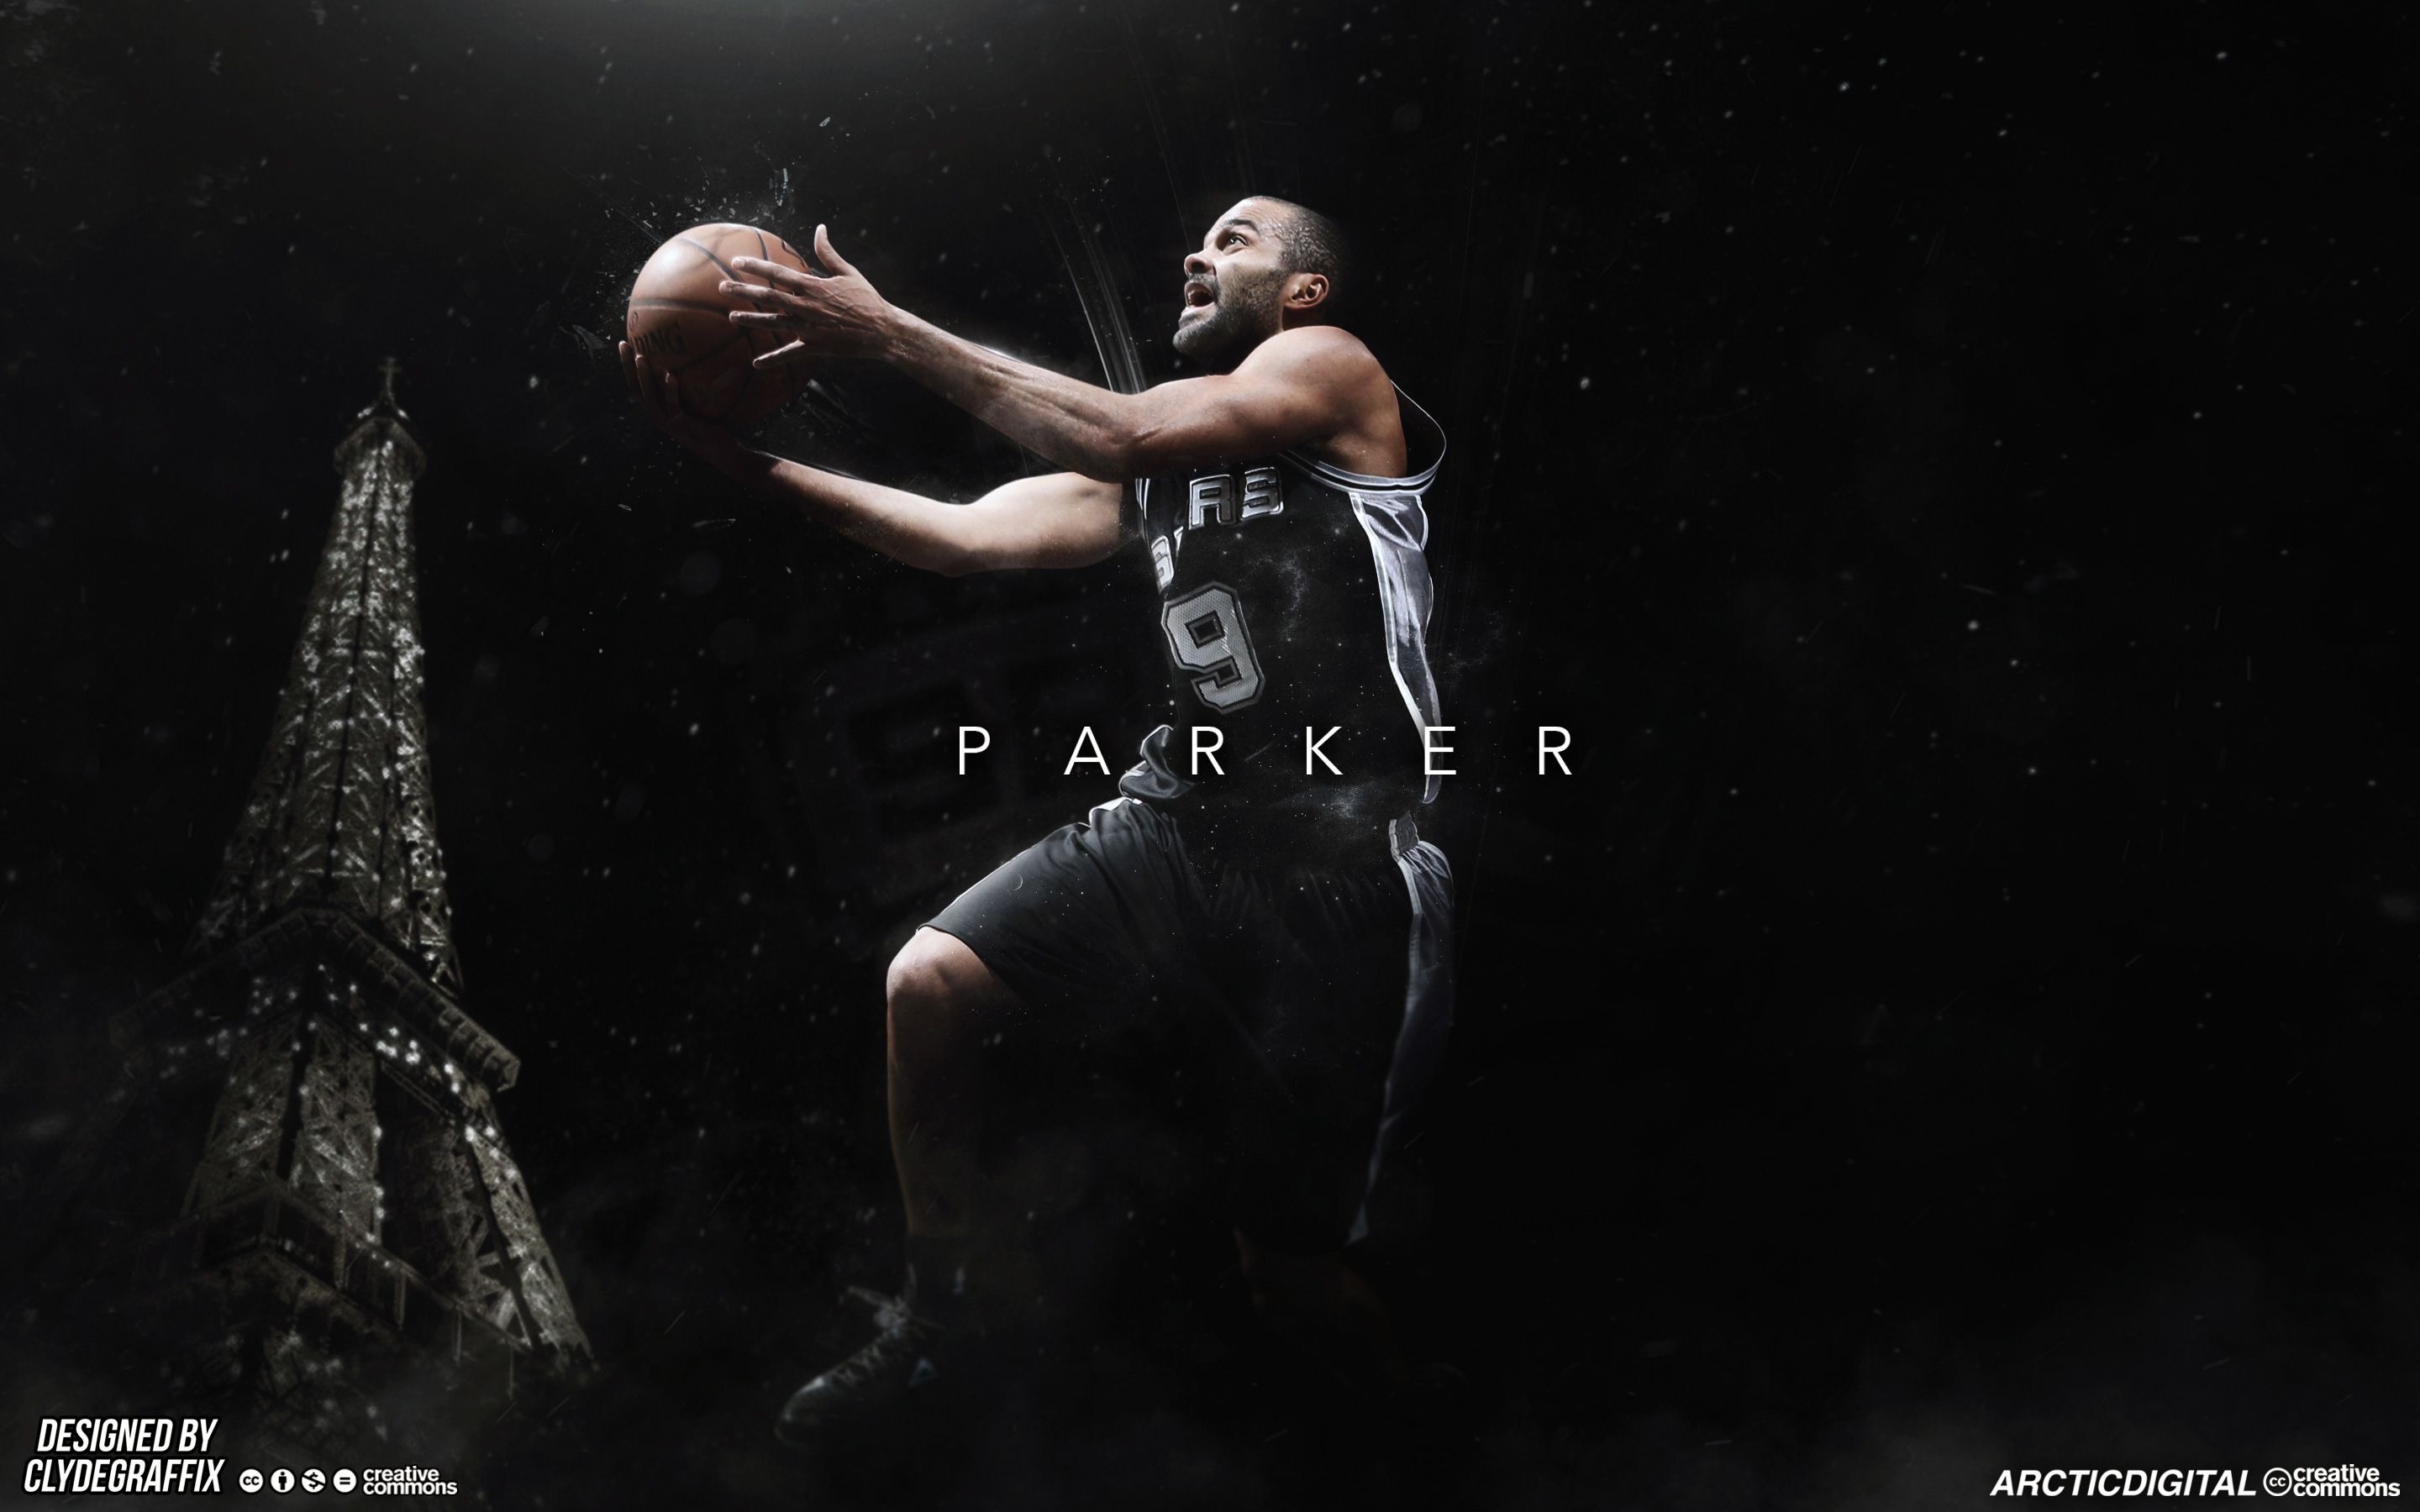 Tony Parker Wallpapers | Basketball Wallpapers at BasketWallpapers.com